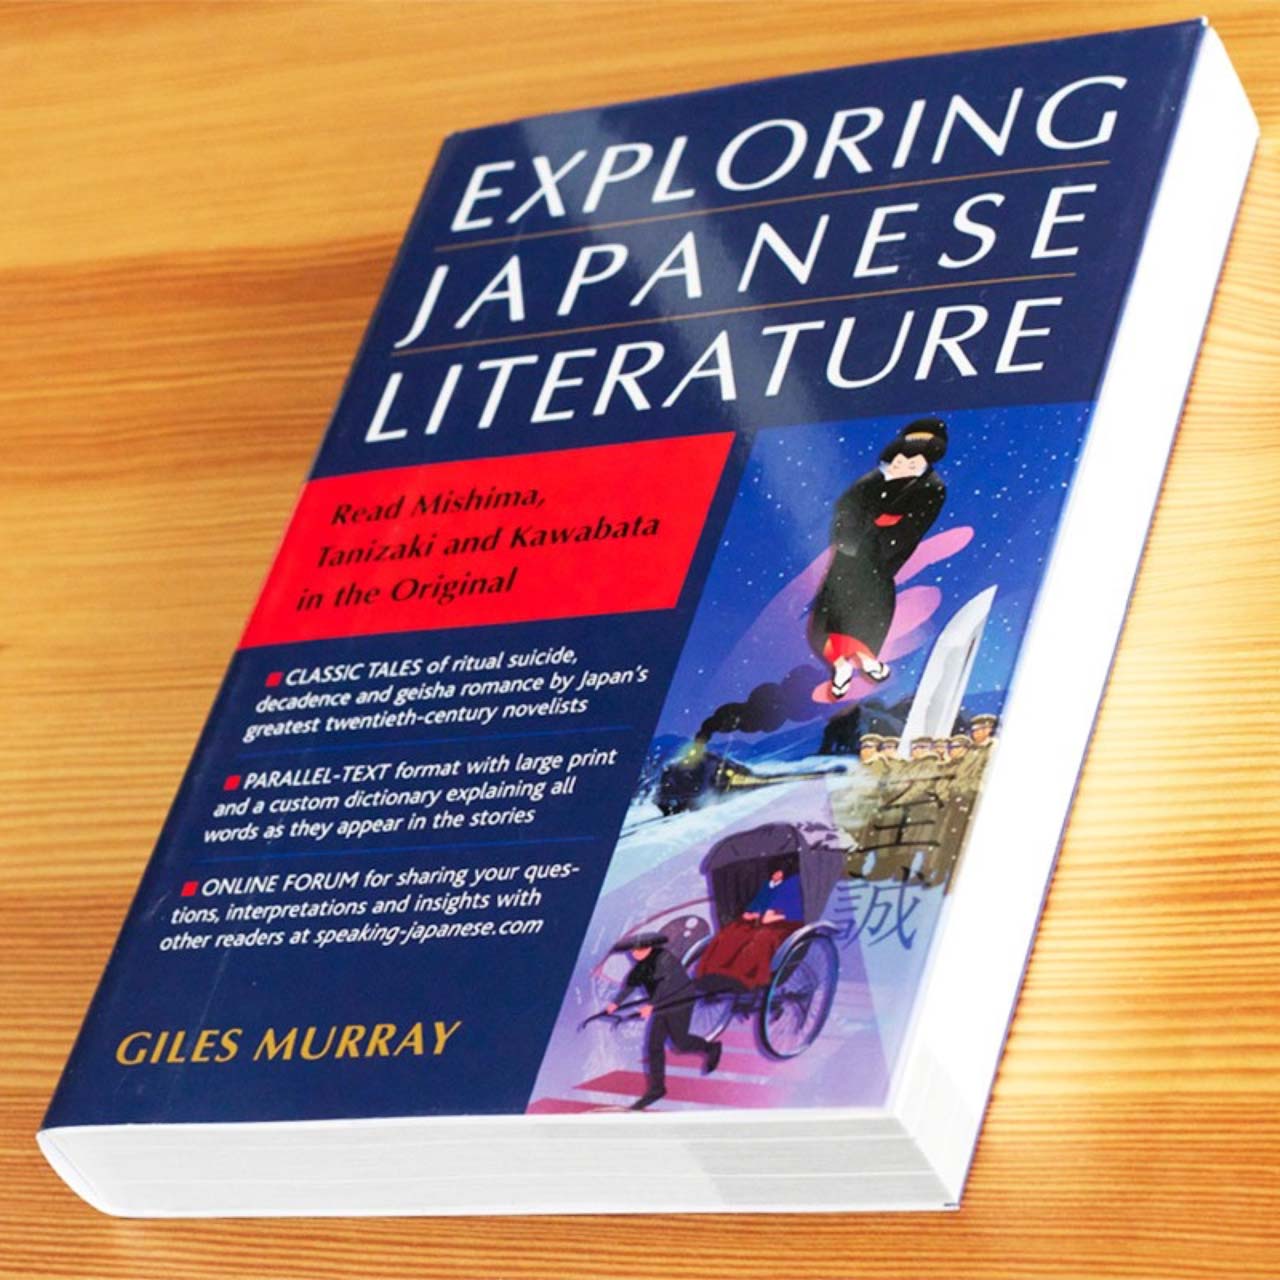 photo of the exploring japanese literature book on a table